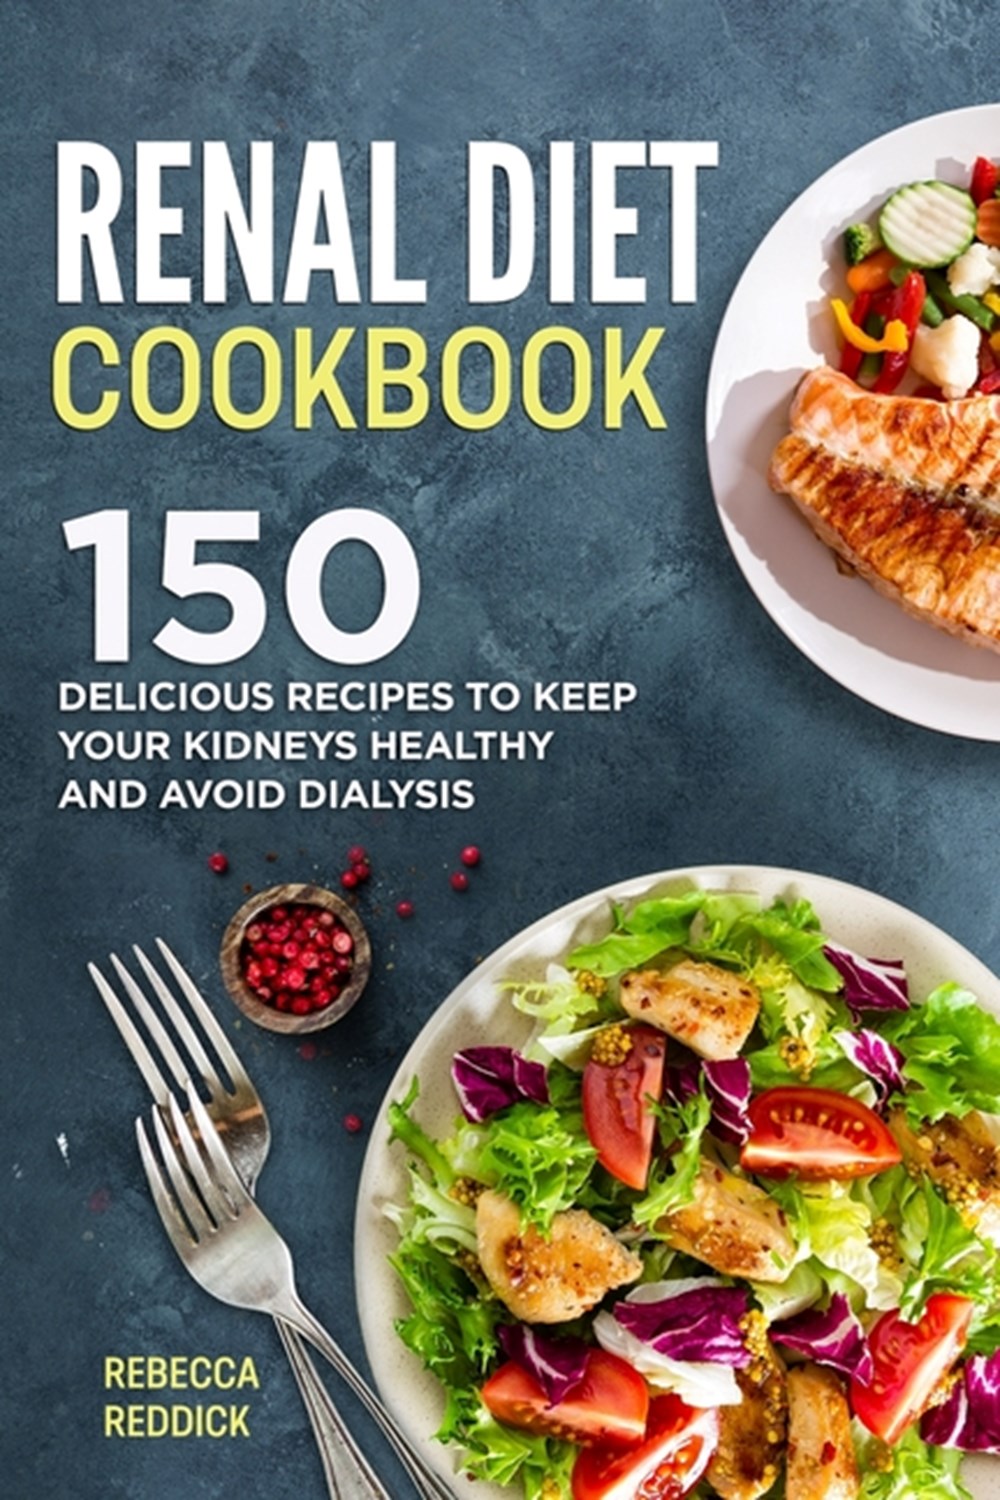 Buy Renal Diet Cookbook: 150 Delicious Recipes to keep your Kidneys